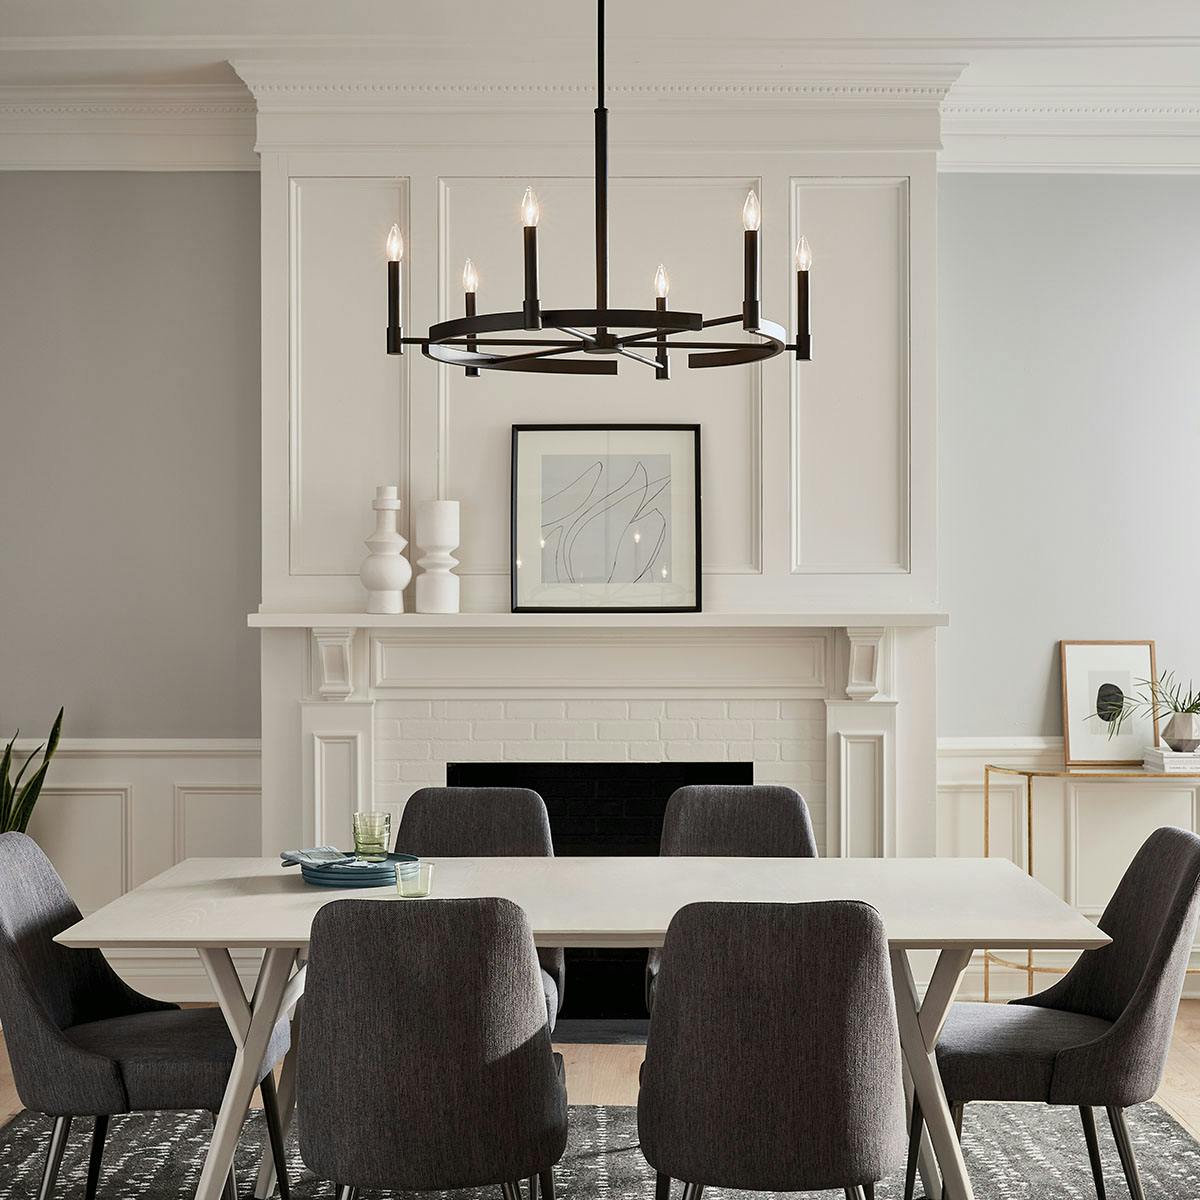 Day time Dining Room image featuring Tolani chandelier 52427BK